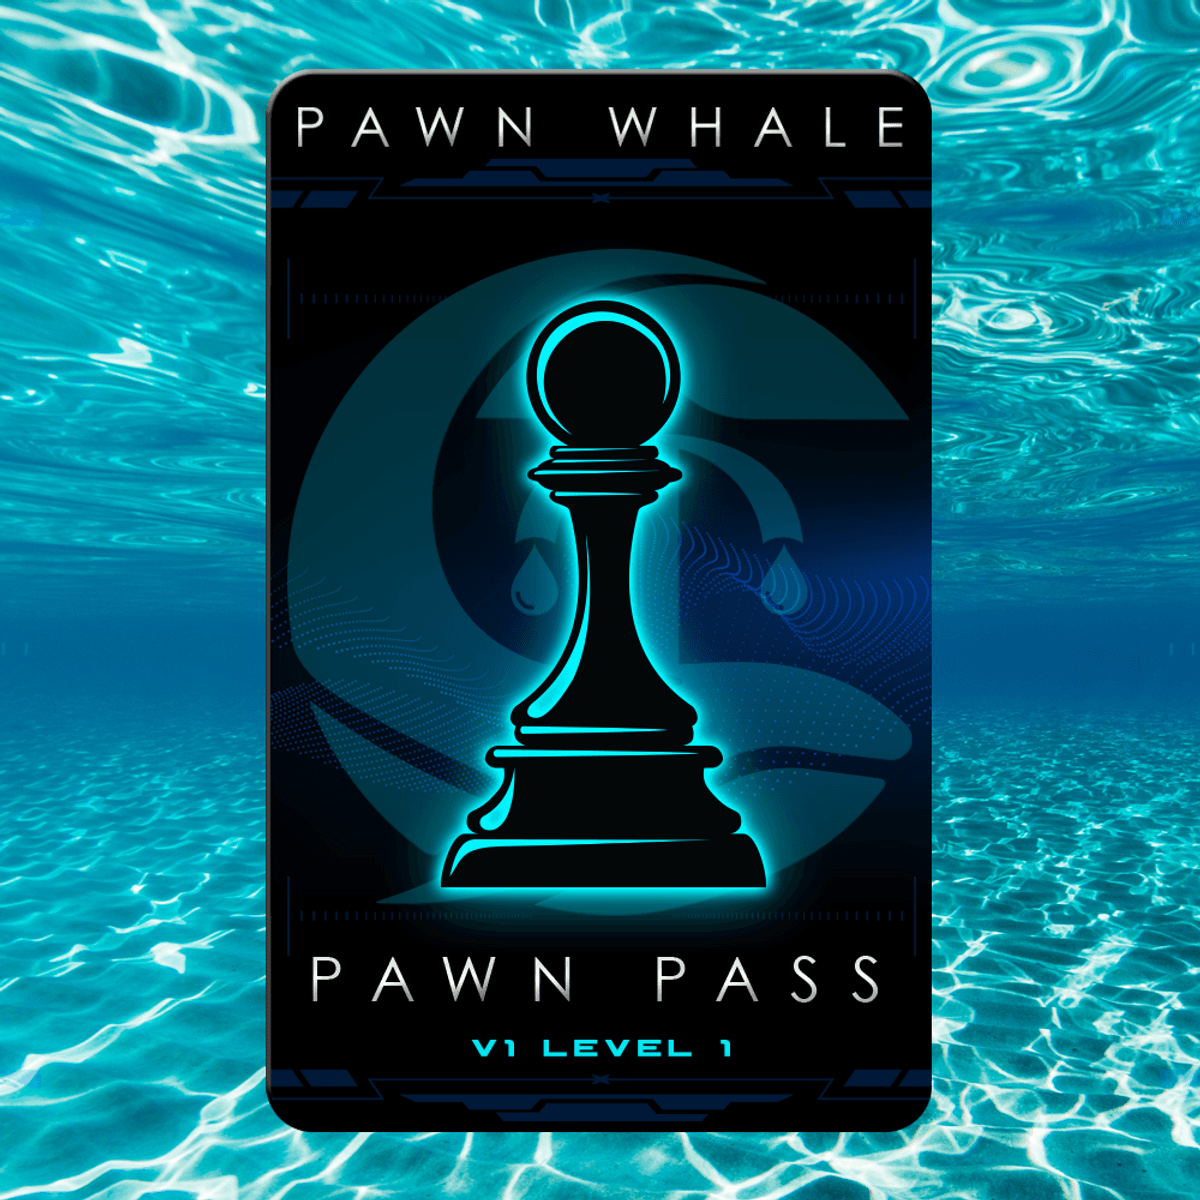 Pawn Whale Pass #2568